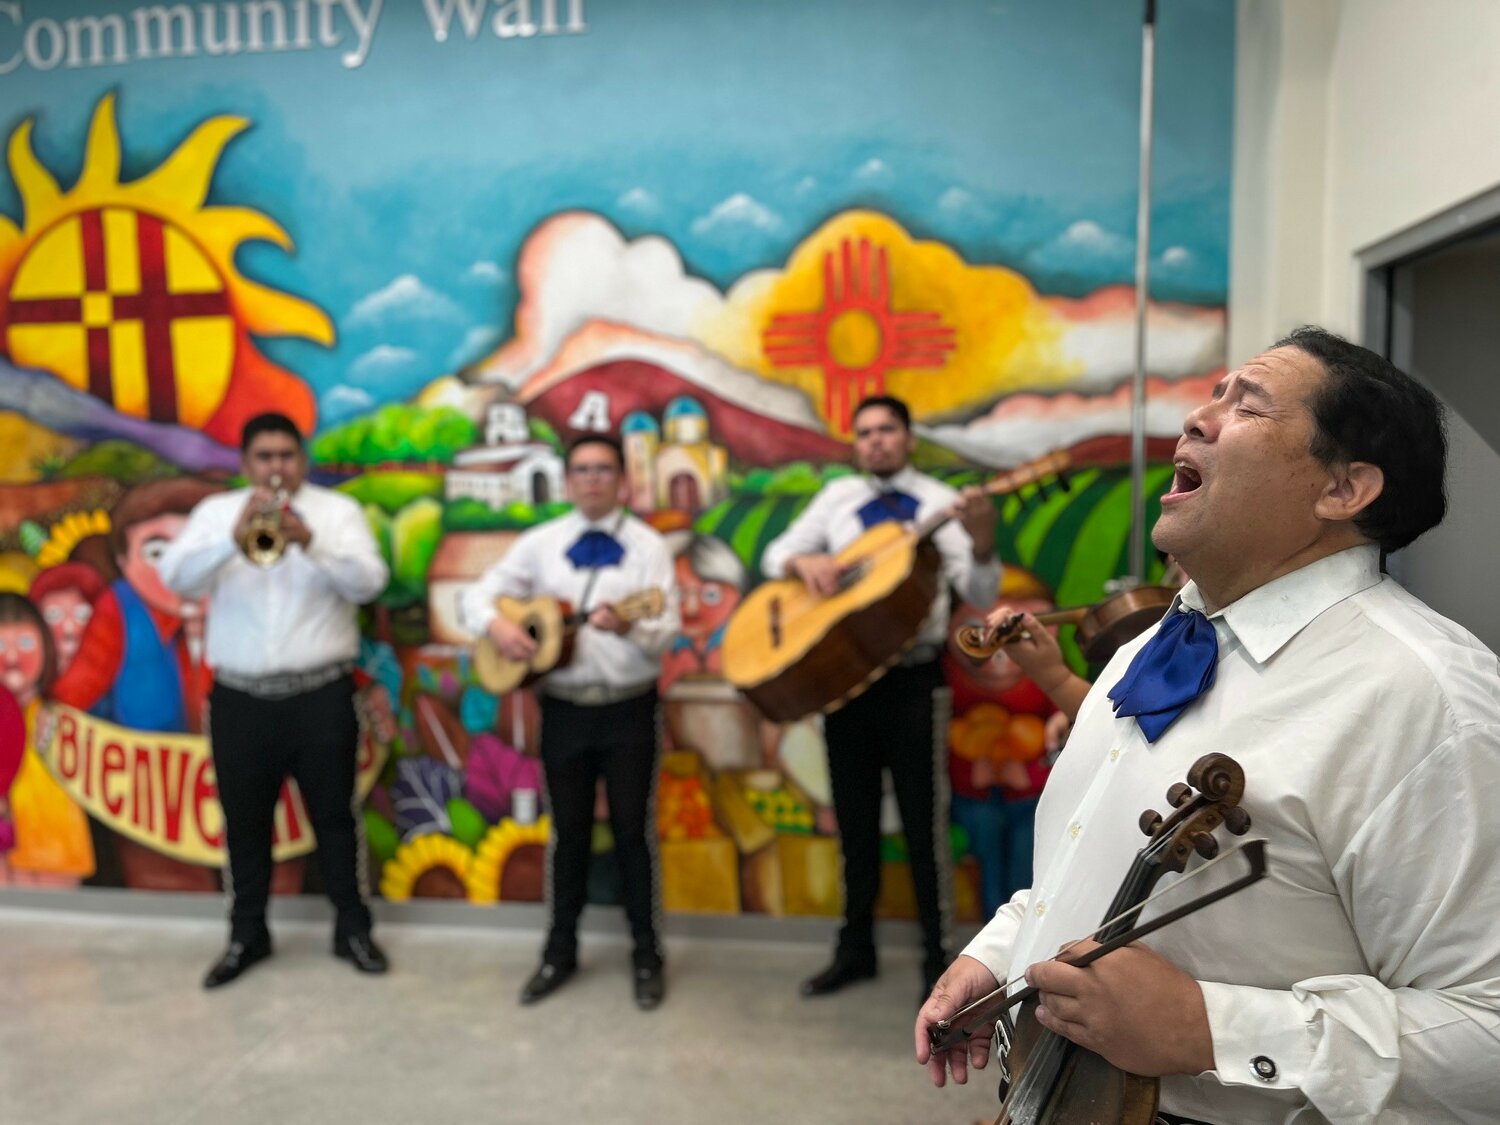 Mariachis perform in the lobby of the Casa de Peregrinos building Friday, Aug. 11, at the grand opening